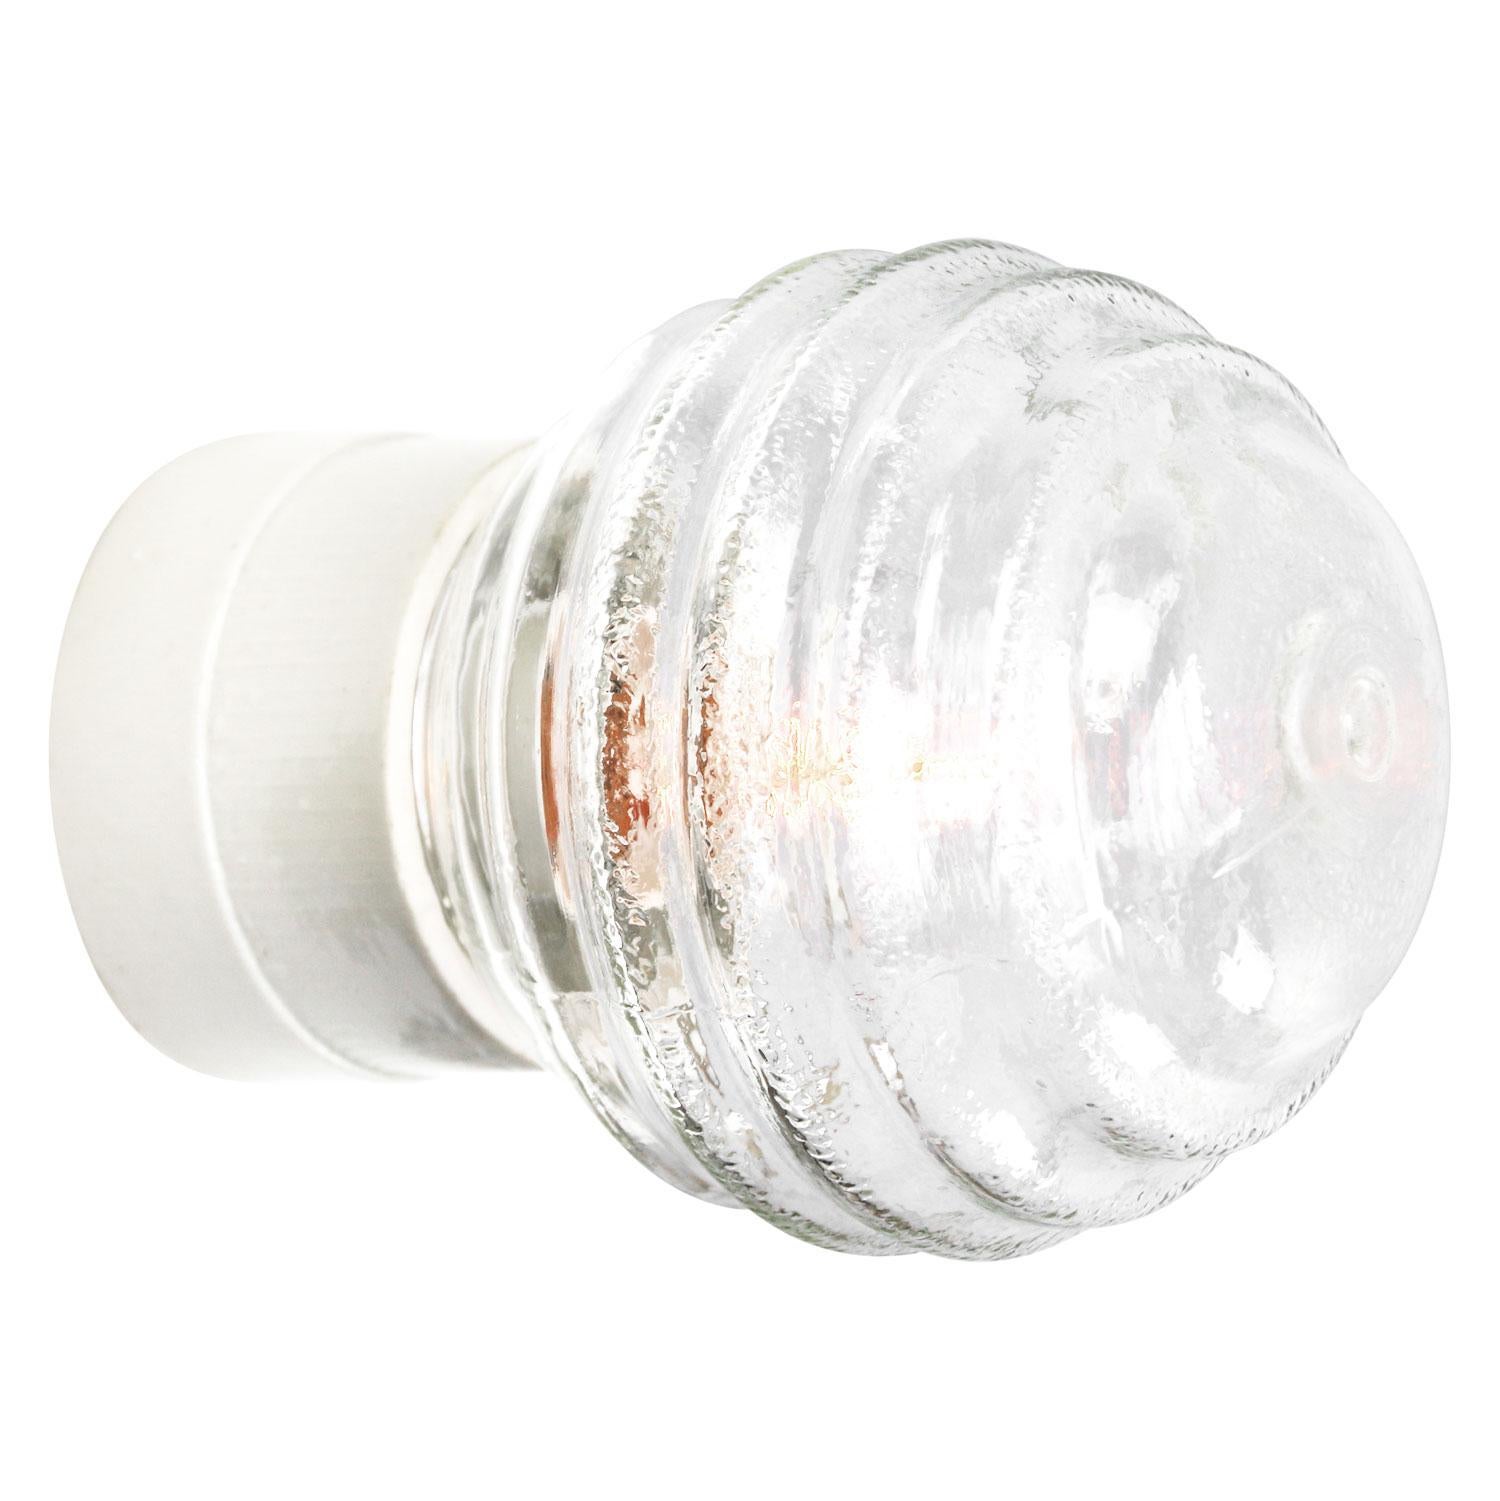 Industrial wall lamp / scones. White porcelain. Striped glass.
Two conductors. No ground.

Weight: 1.30 kg / 2.9 lb

Priced per individual item. All lamps have been made suitable by international standards for incandescent light bulbs,